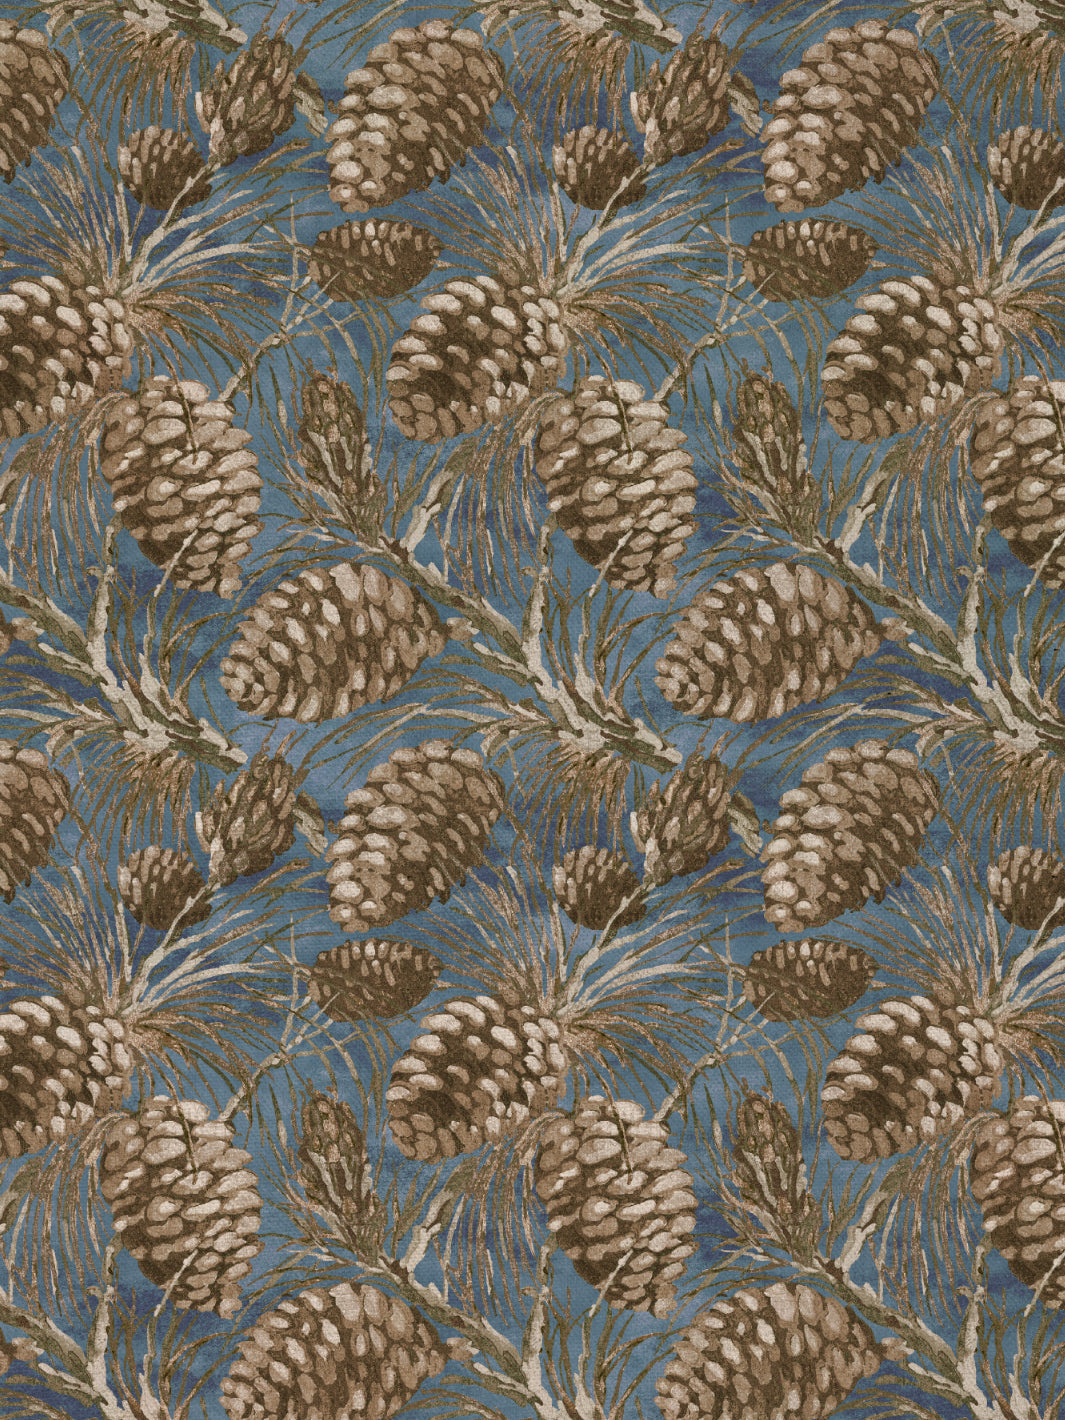 'Pinecones' Linen Fabric by Nathan Turner - Blue